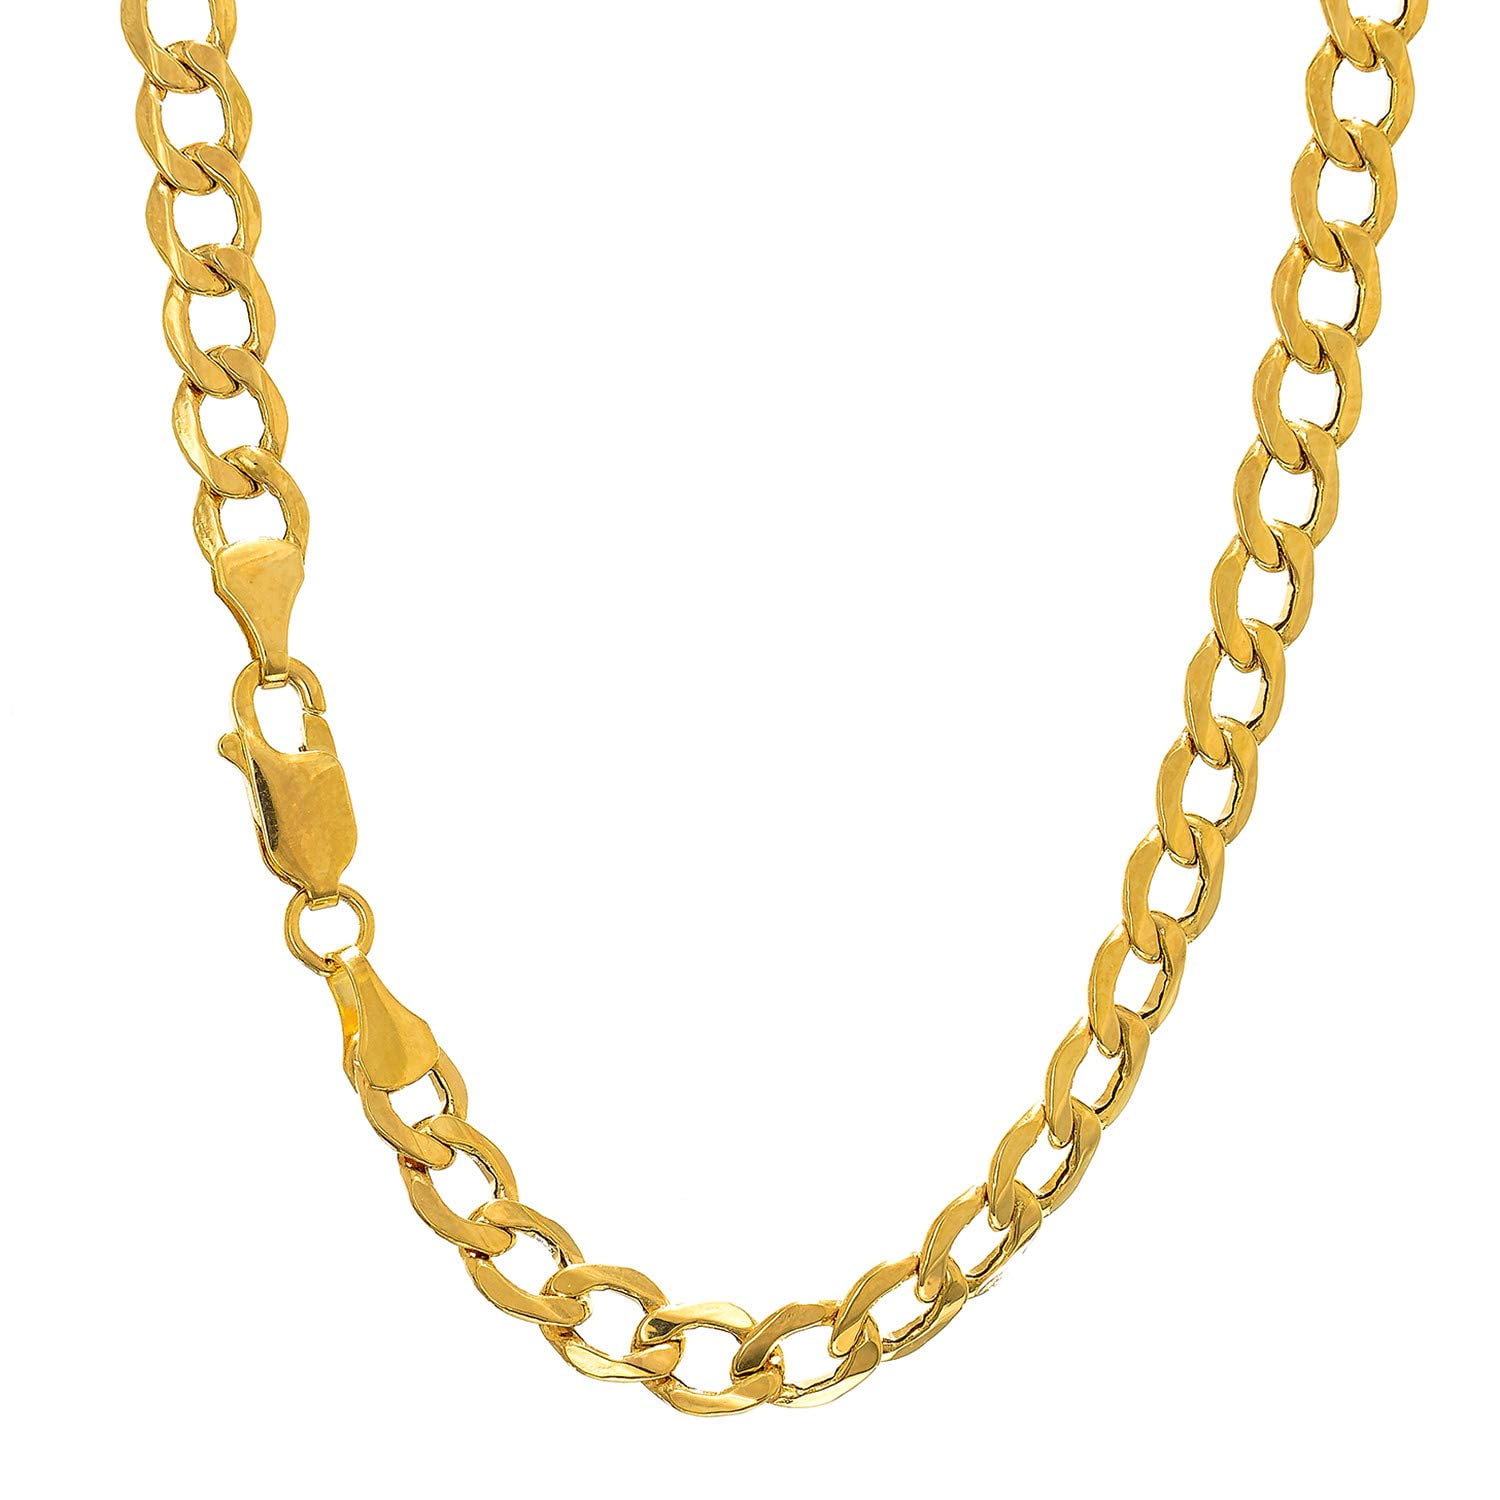 10k Semi-Solid Yellow Gold 2.8 mm Lite Figaro Necklace Lobster Claw